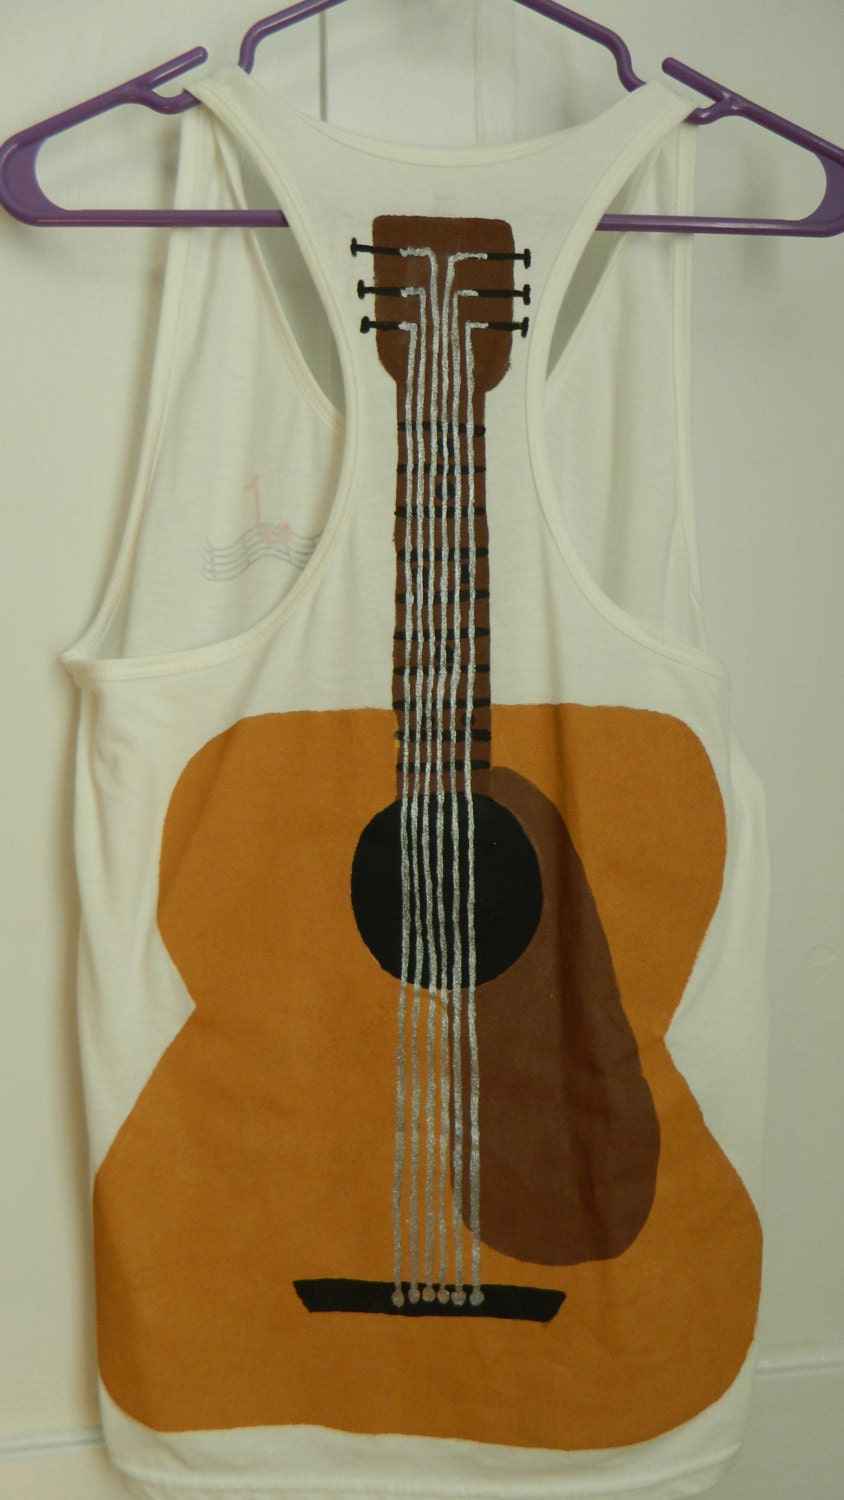 Acoustic guitar tank hand-painted tank top - TwoStylishSisters